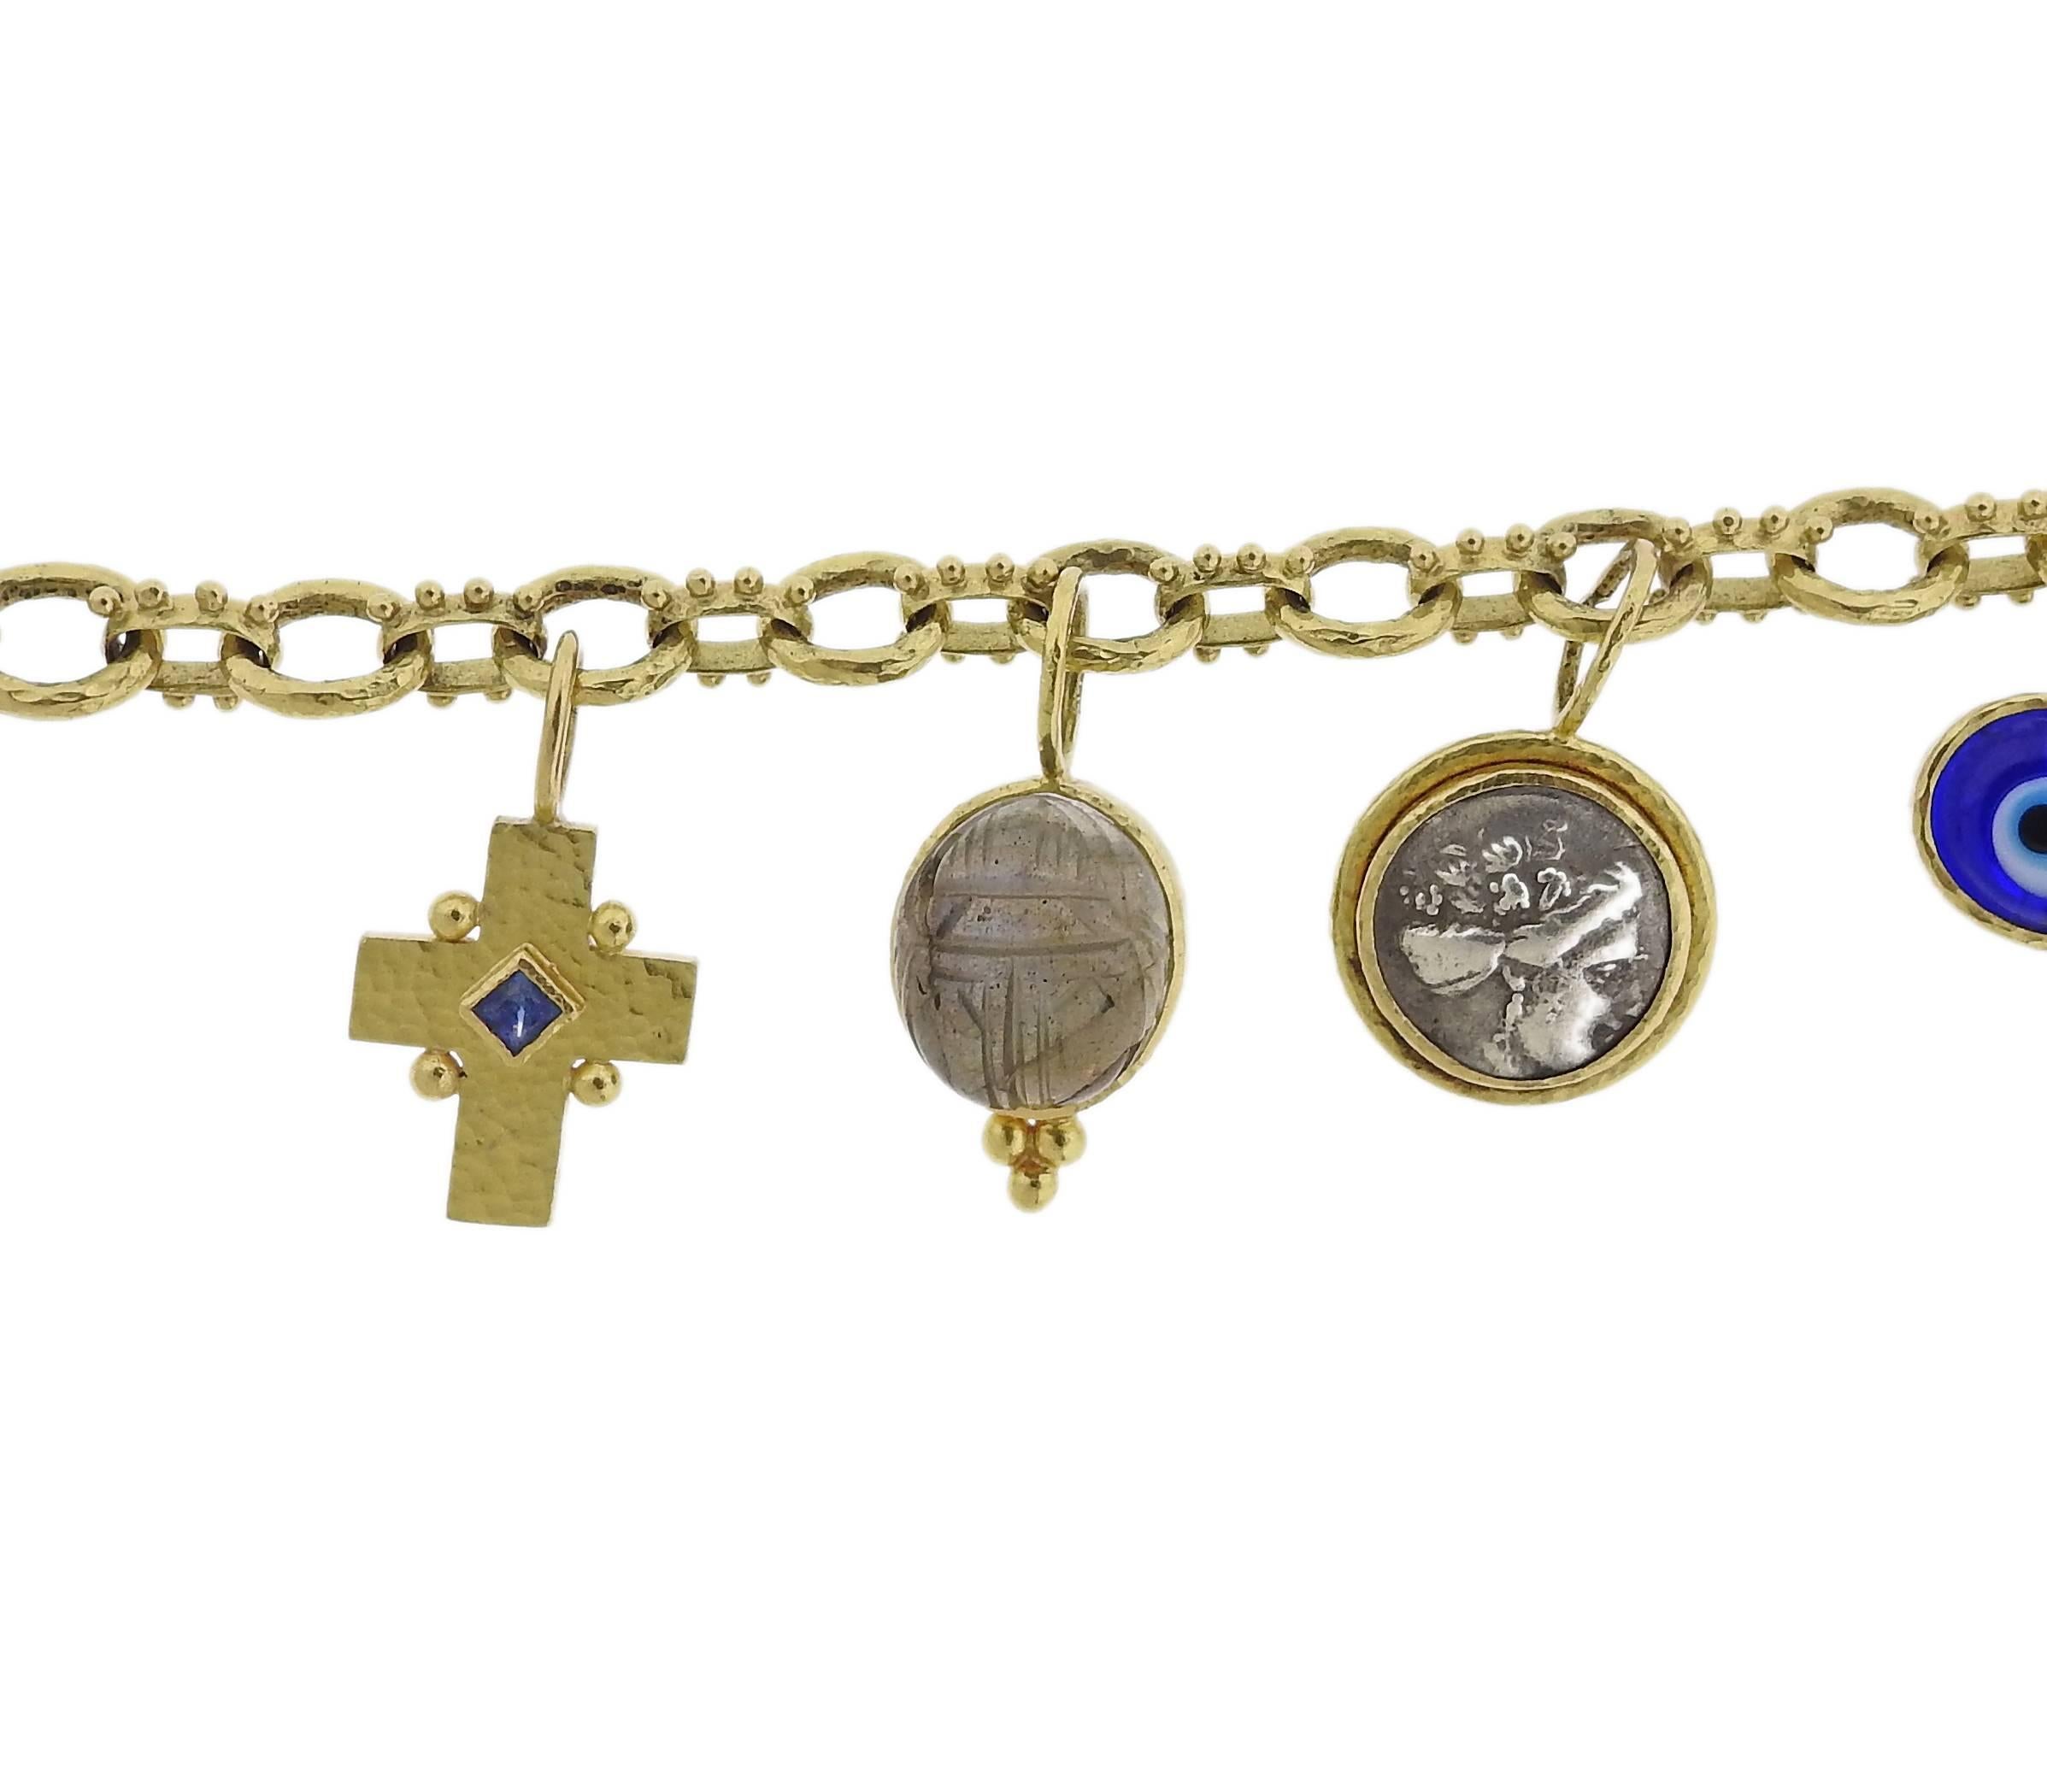 An 18k yellow gold toggle bracelet, crafted by Elizabeth Locke, featuring five charms: an evil eye, ancient coin, labradorite scarab, cross with a sapphire and Venetian glass intaglio. Bracelet is 8" long, charms approx. 22mm long. Marked: 18k,